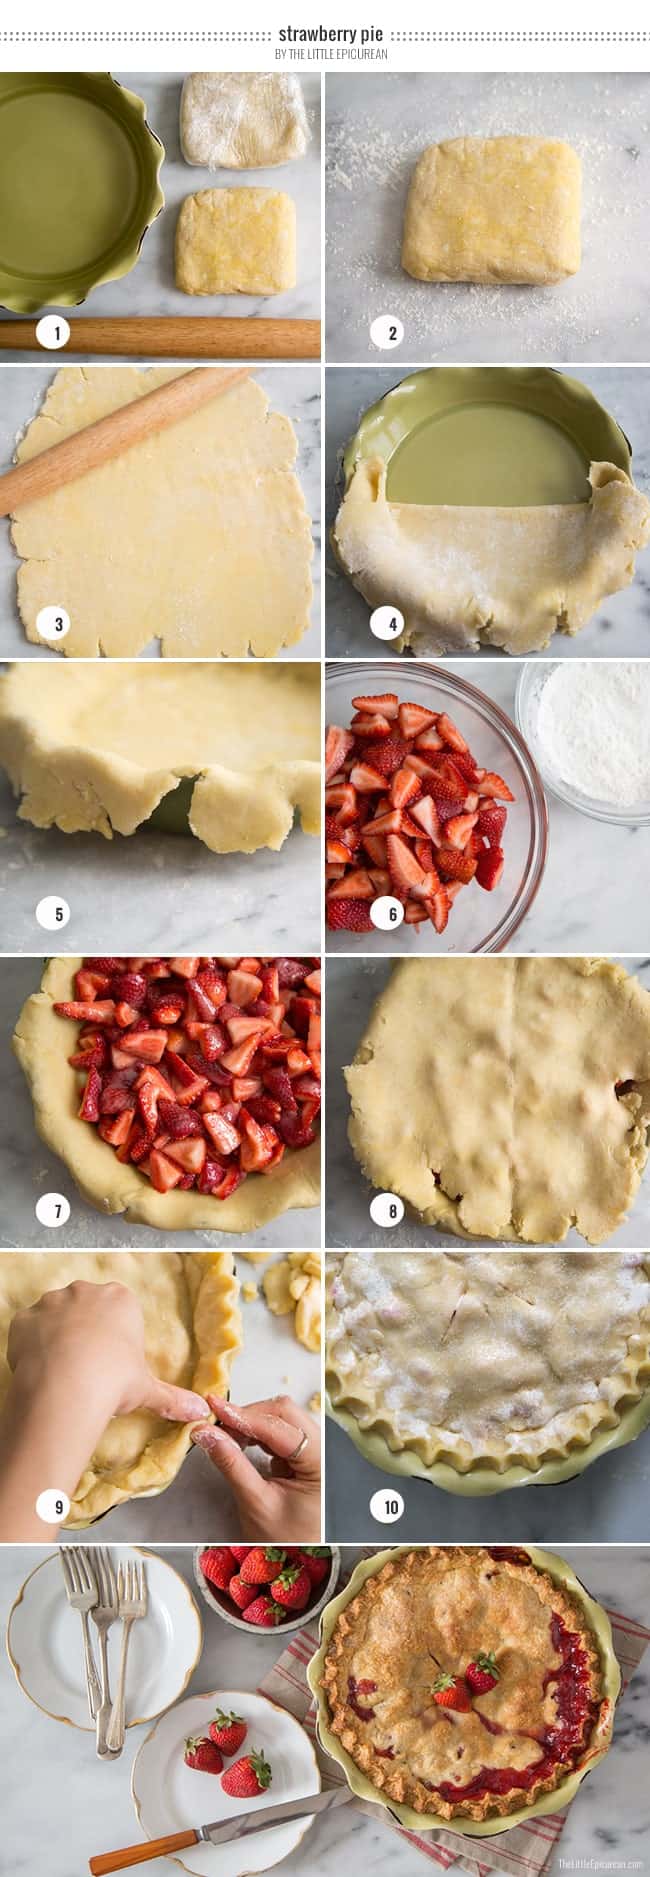 step by step images showing how to make from-scratch strawberry pie.